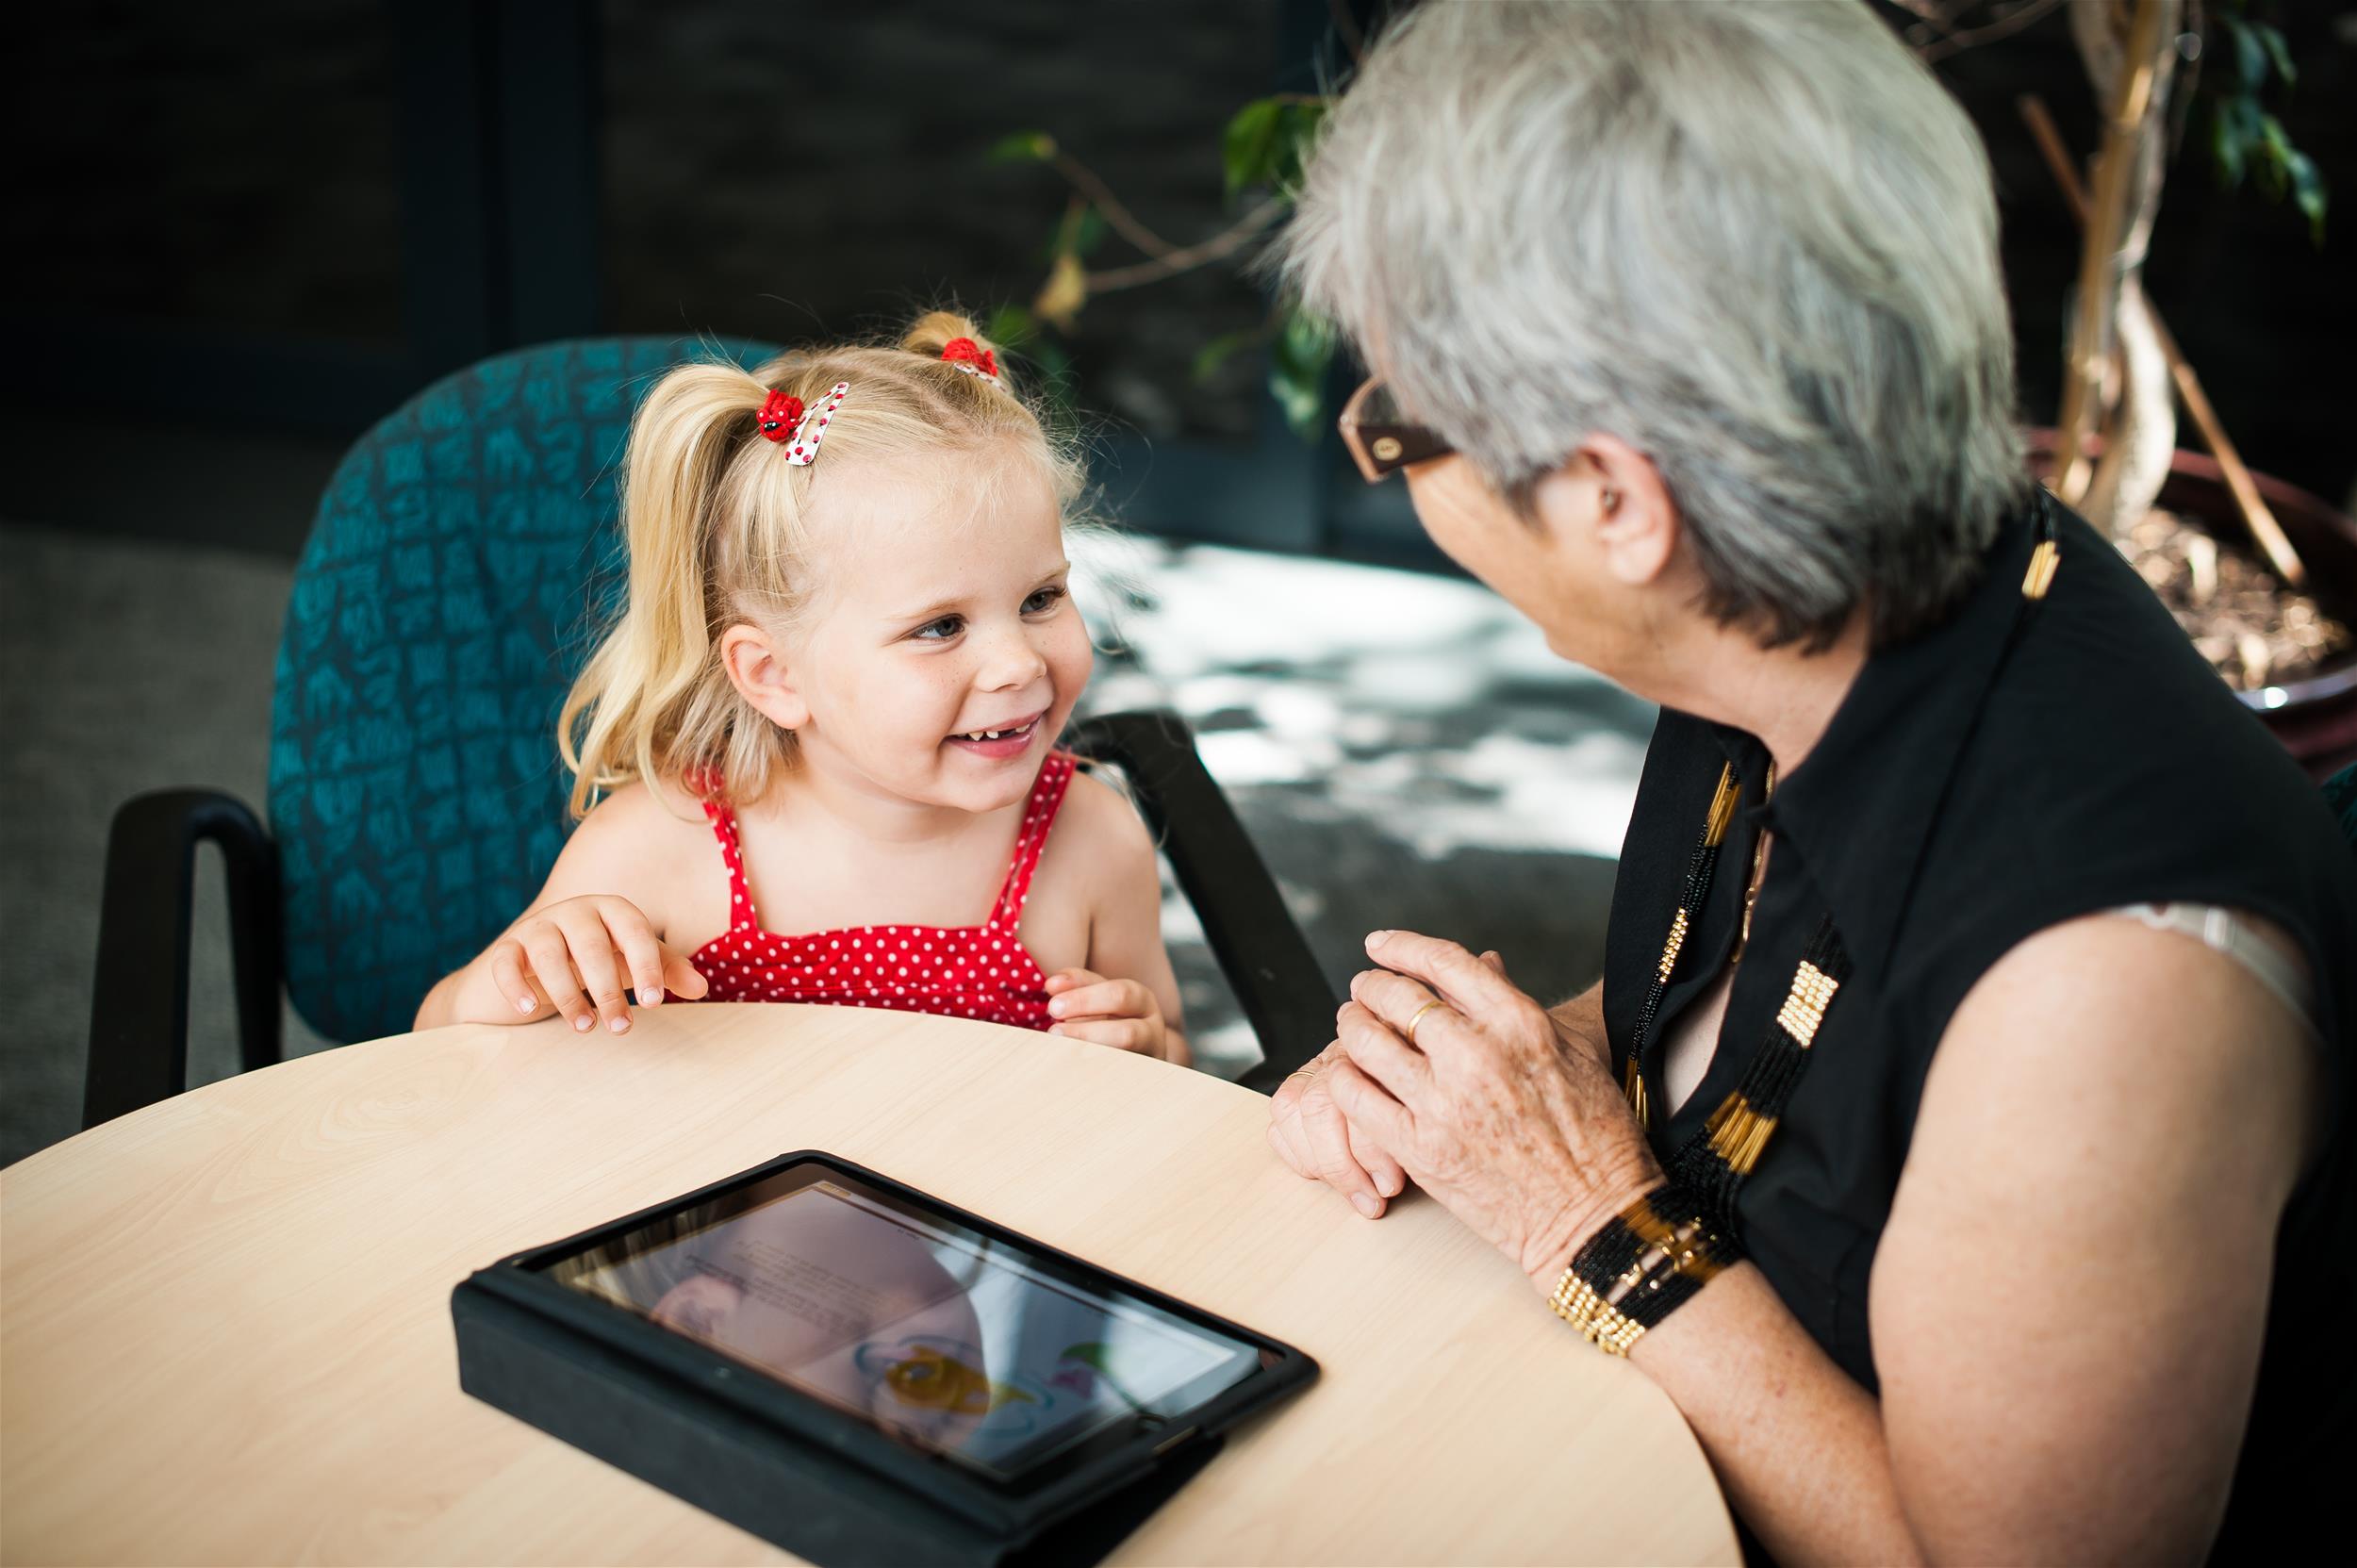 smiling young girl in red dress looking at an older lady in side profile wearing glasses with a tablet on the table